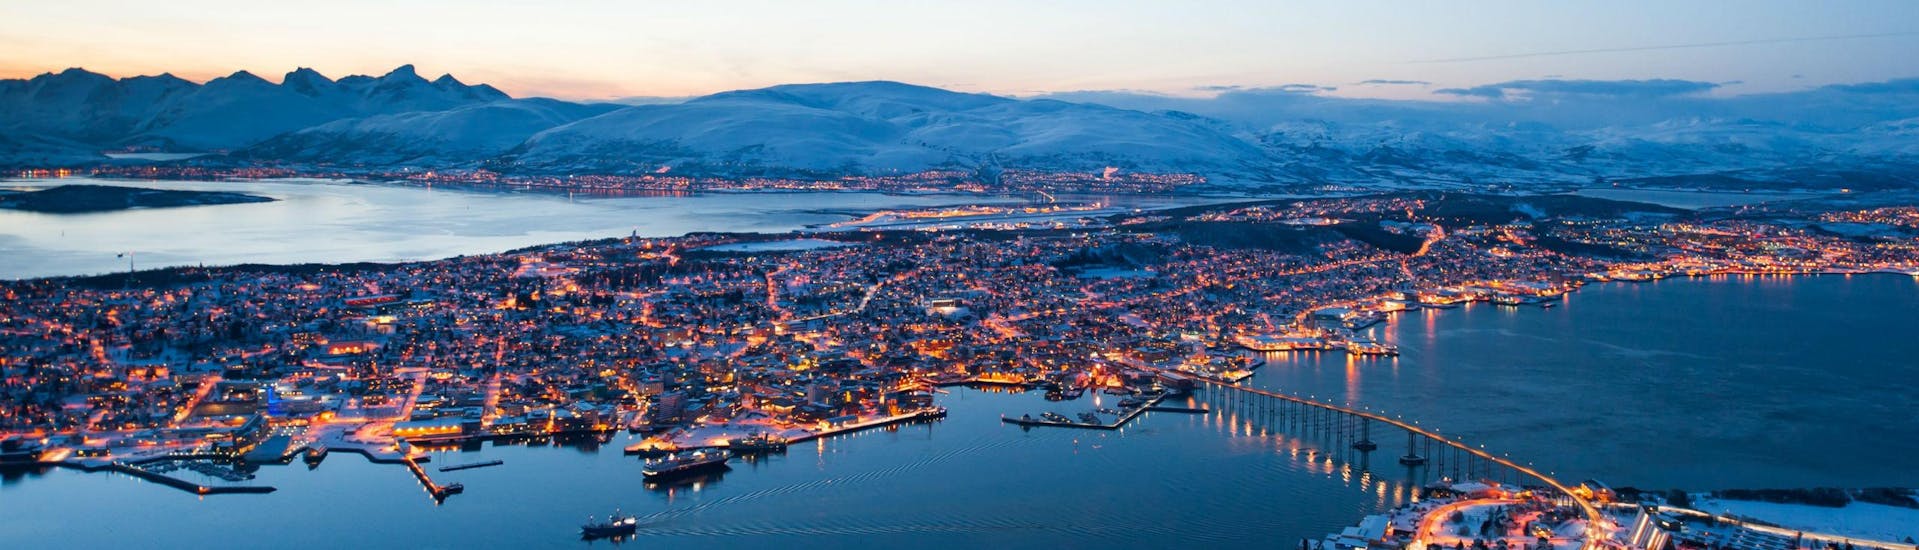 A view of Norway's Arctic Capital Tromsø at sunset, where several operators offer a range of boat trips for visitors to go whale watching, see the fjords or catch a glimpse of the northern lights.